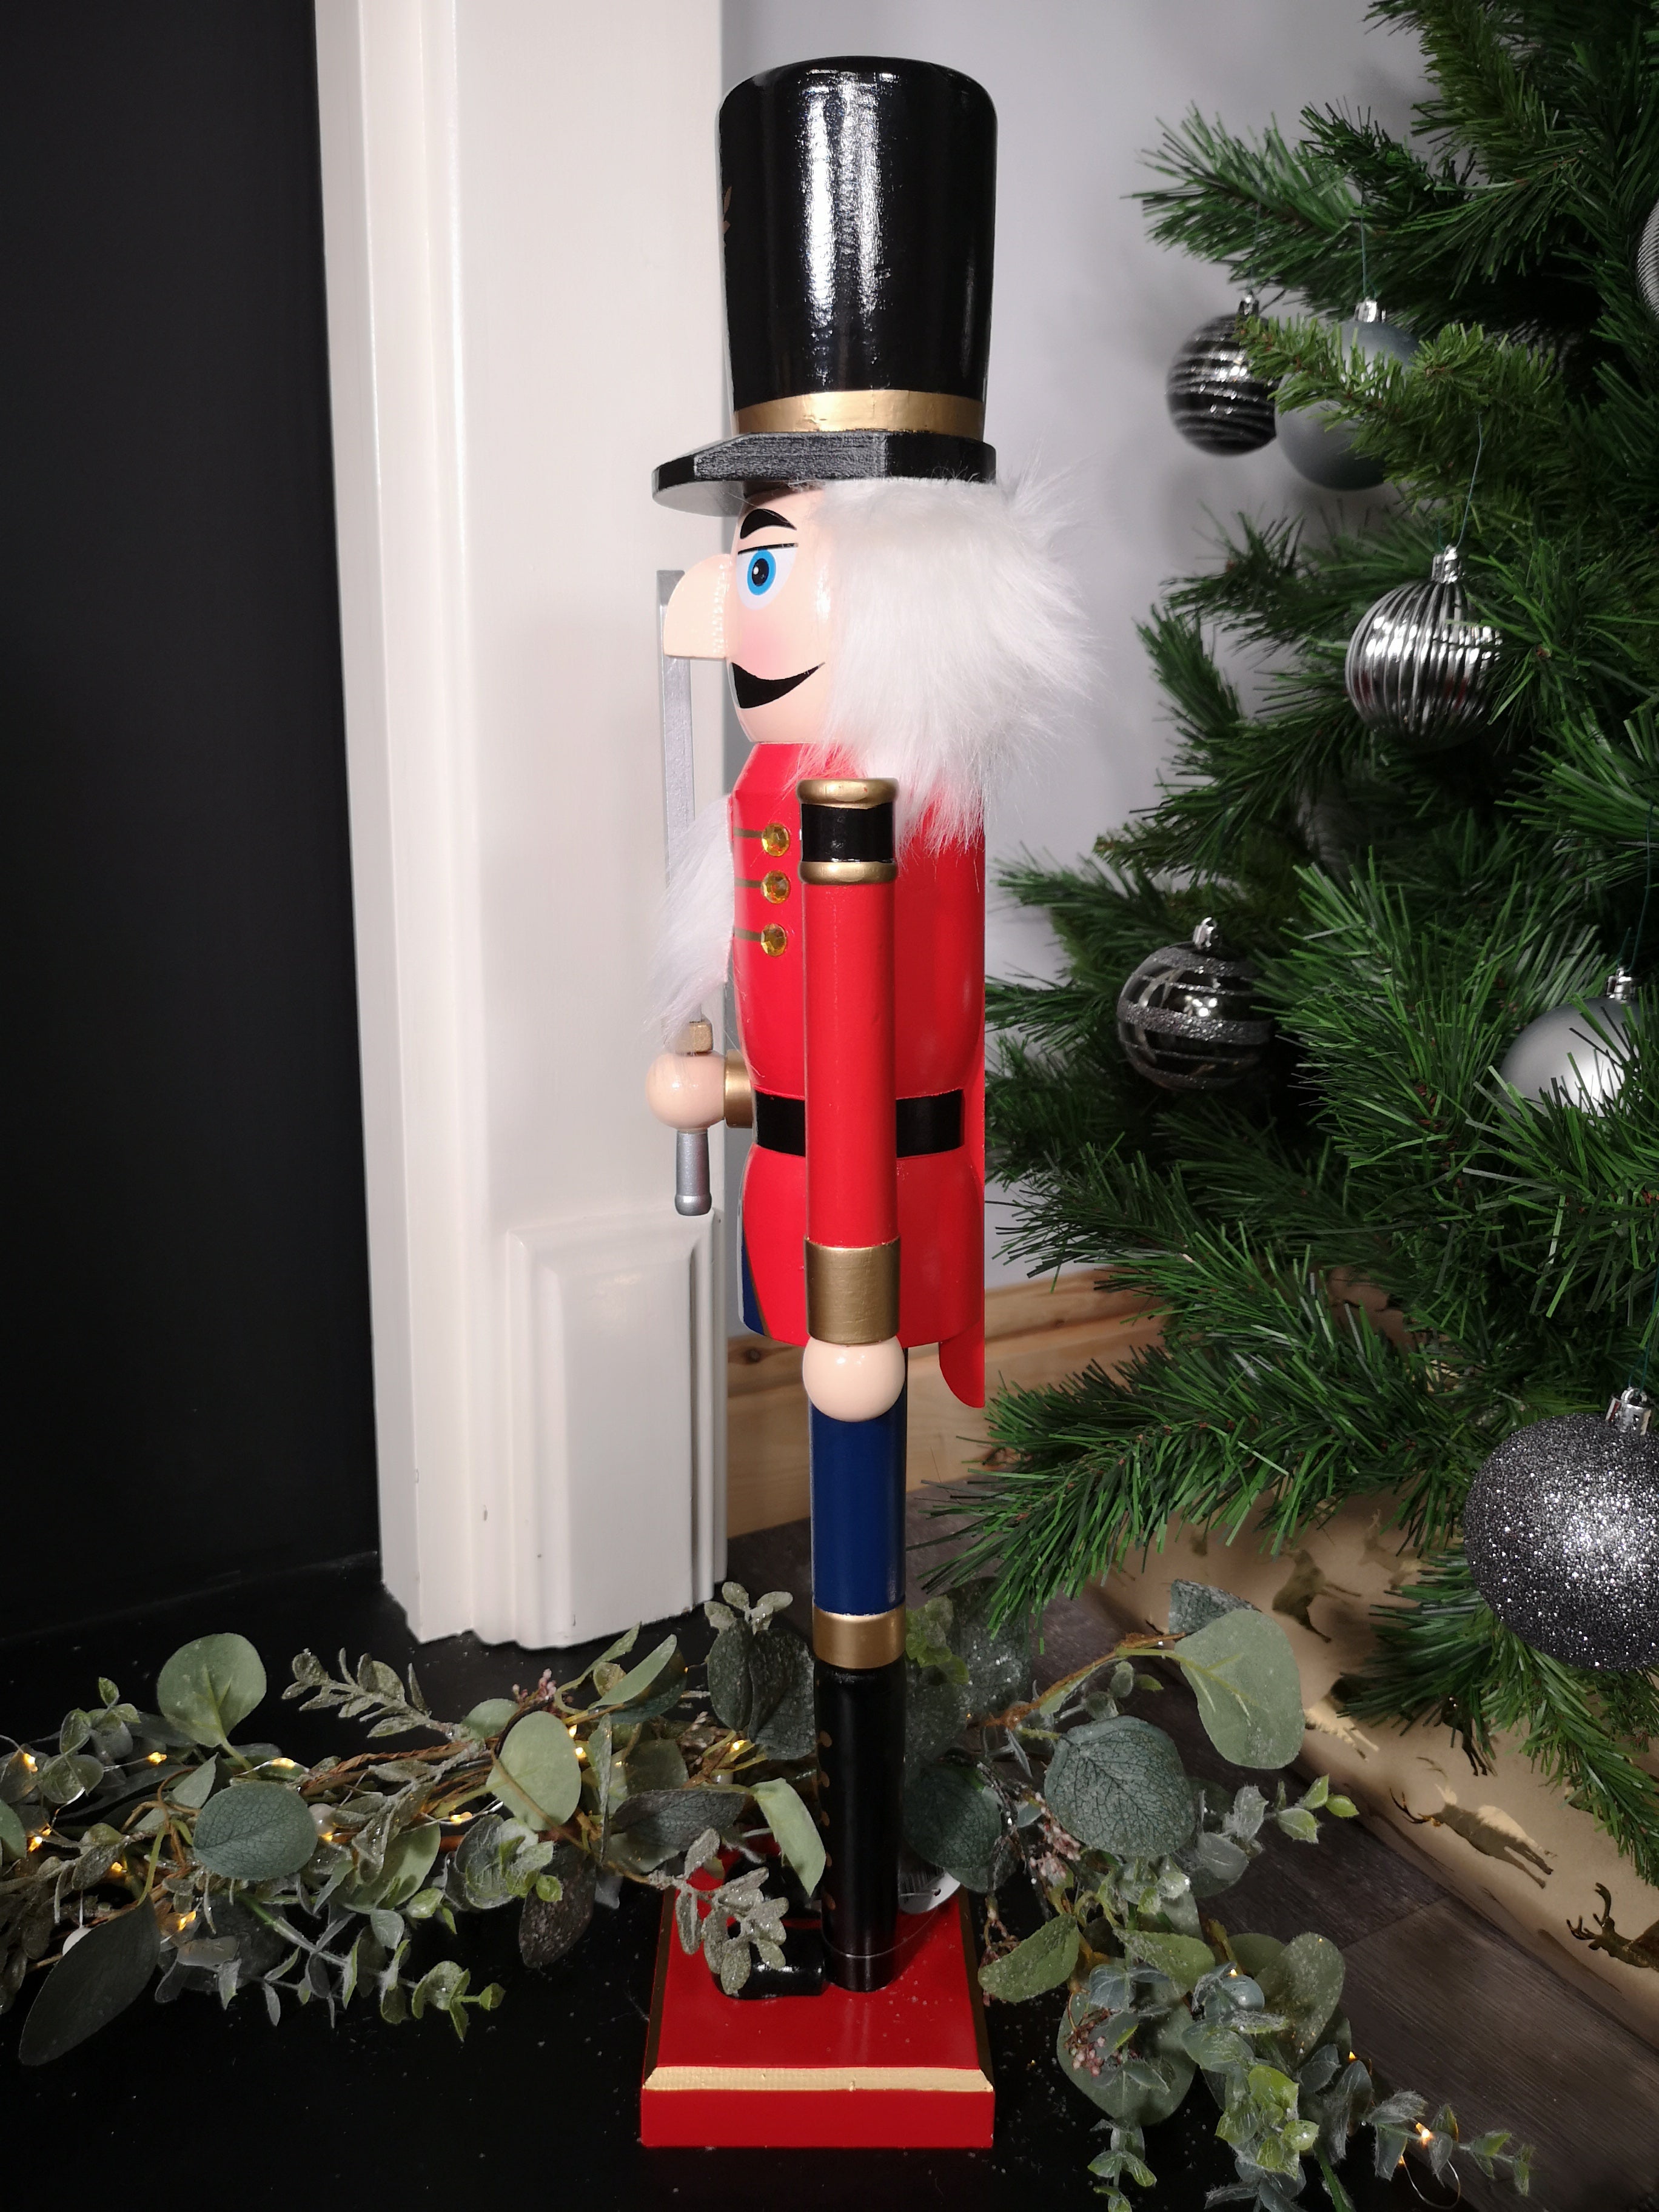 60cm Traditional Wooden Christmas Nutcracker Soldier Decoration with Red Body